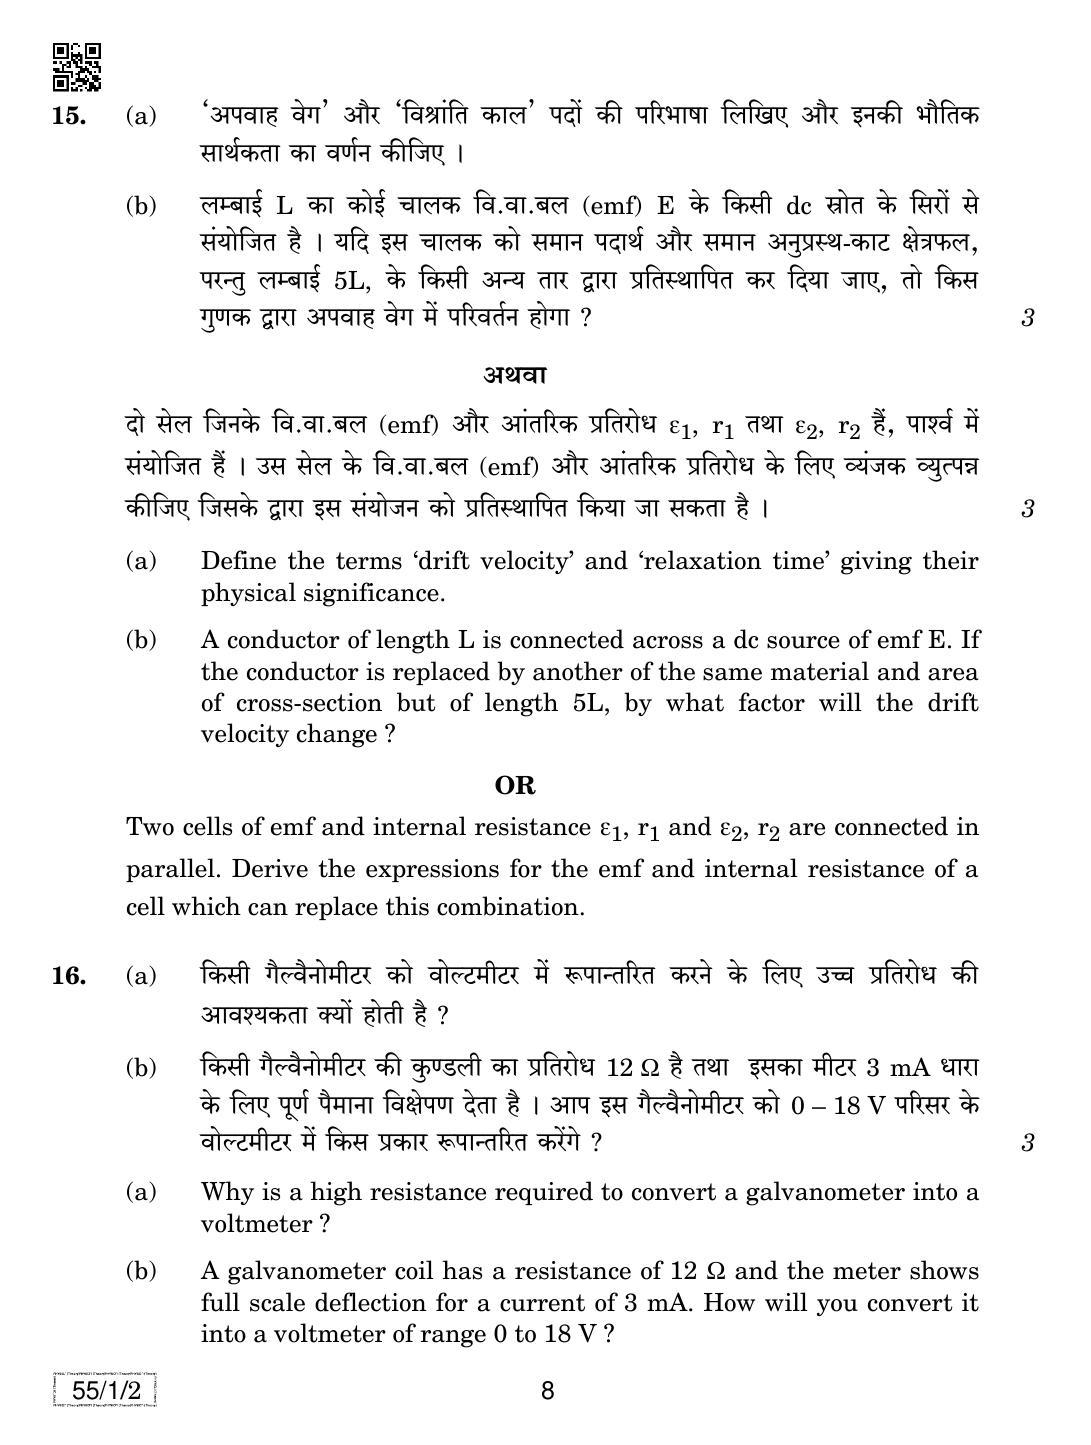 CBSE Class 12 55-1-2 PHYSICS 2019 Compartment Question Paper - Page 8